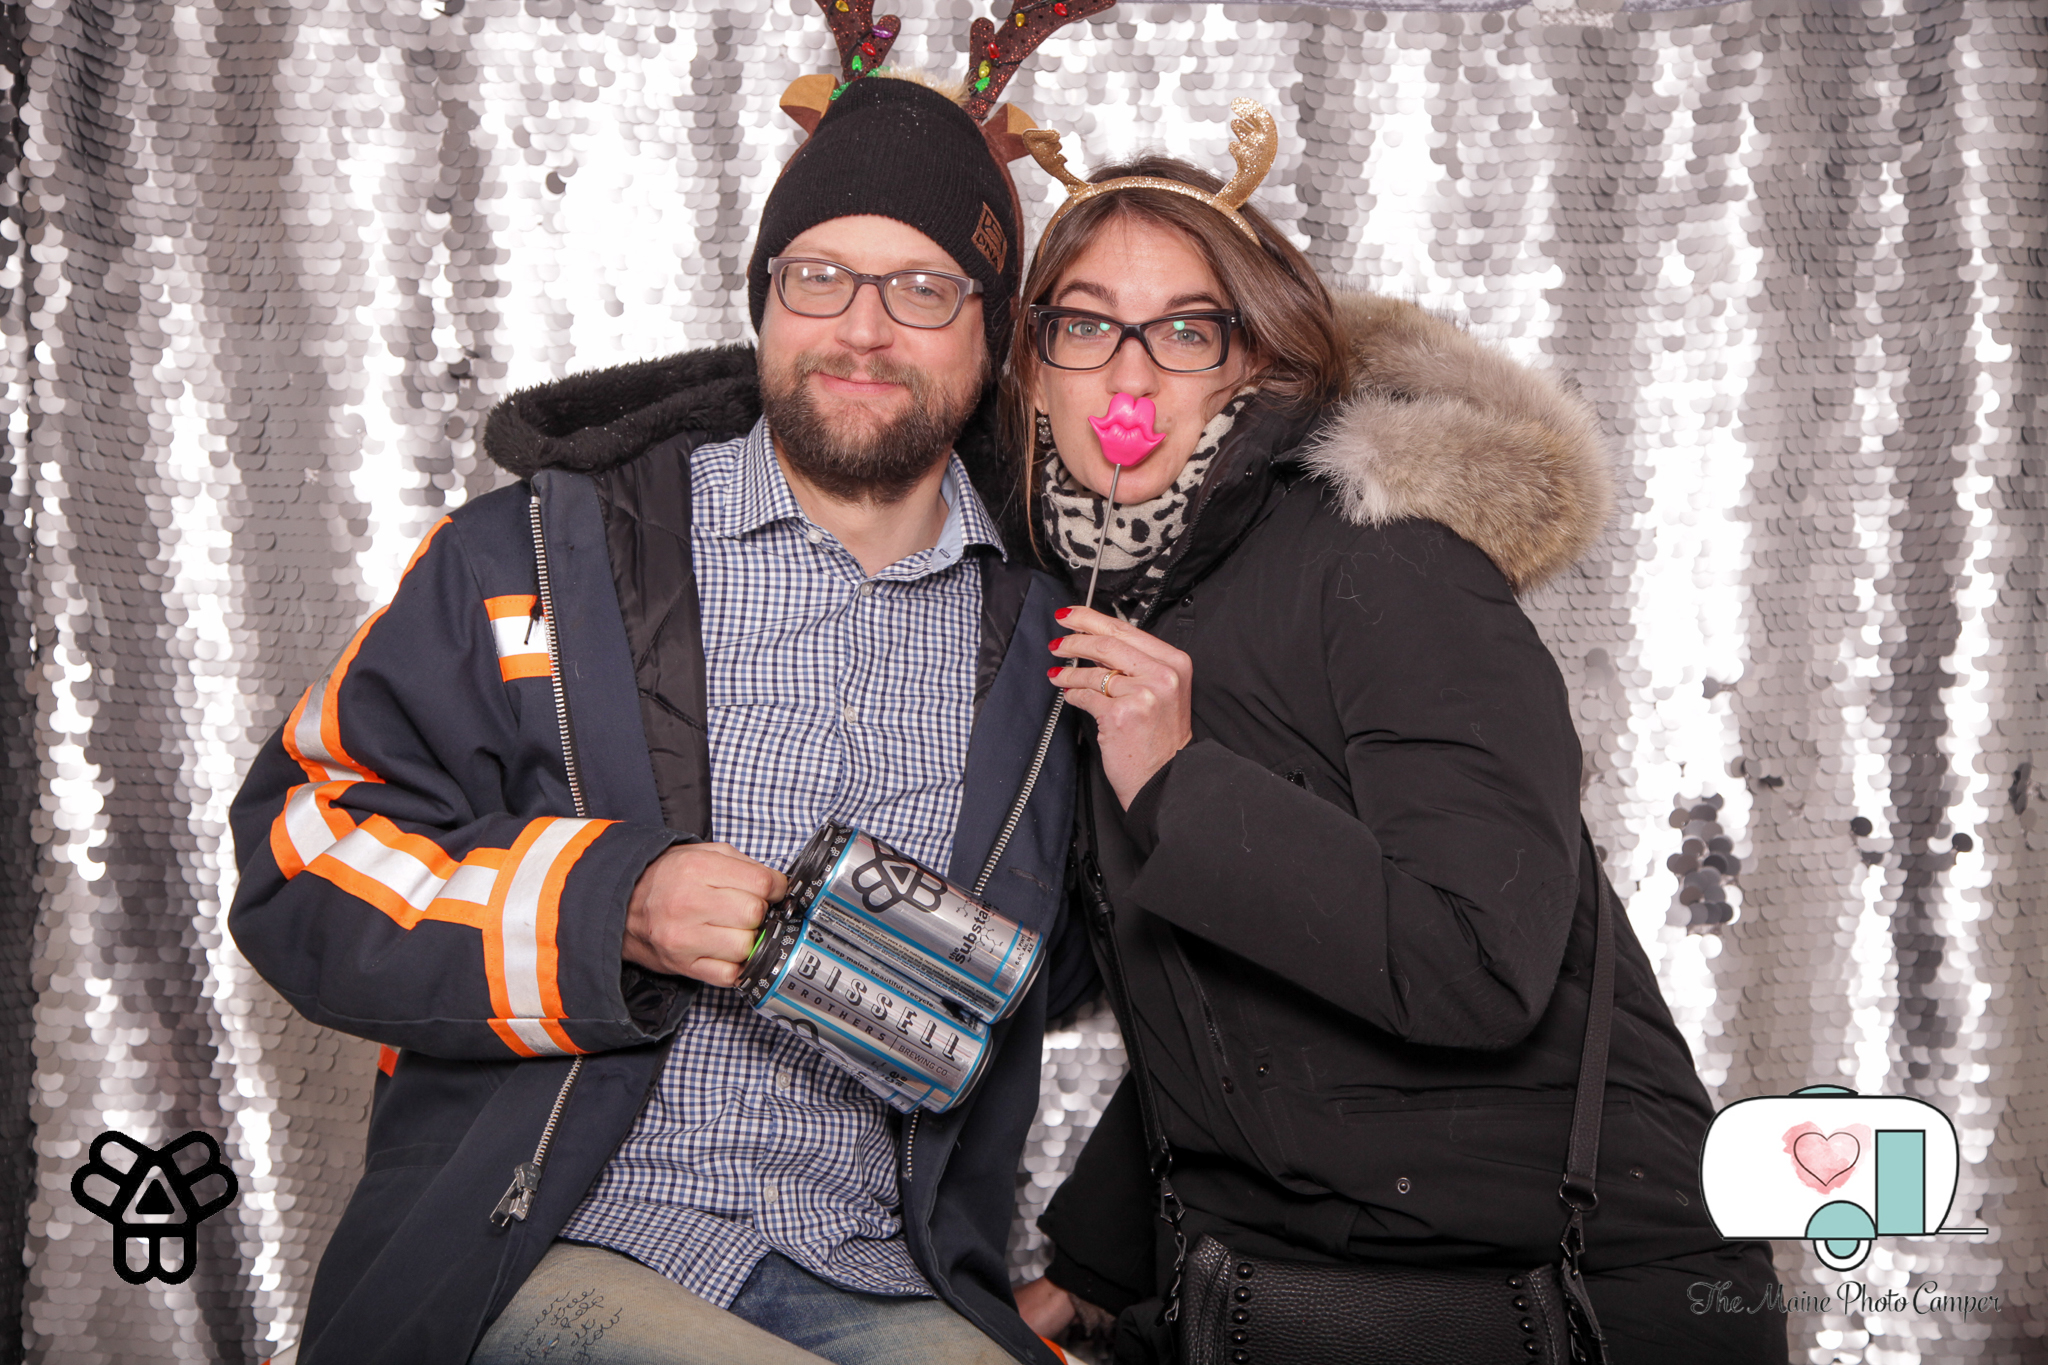 Bissell Brothers Holiday Party 2016, The Maine Photo Camper, Maine Tinker Photography -11.jpg